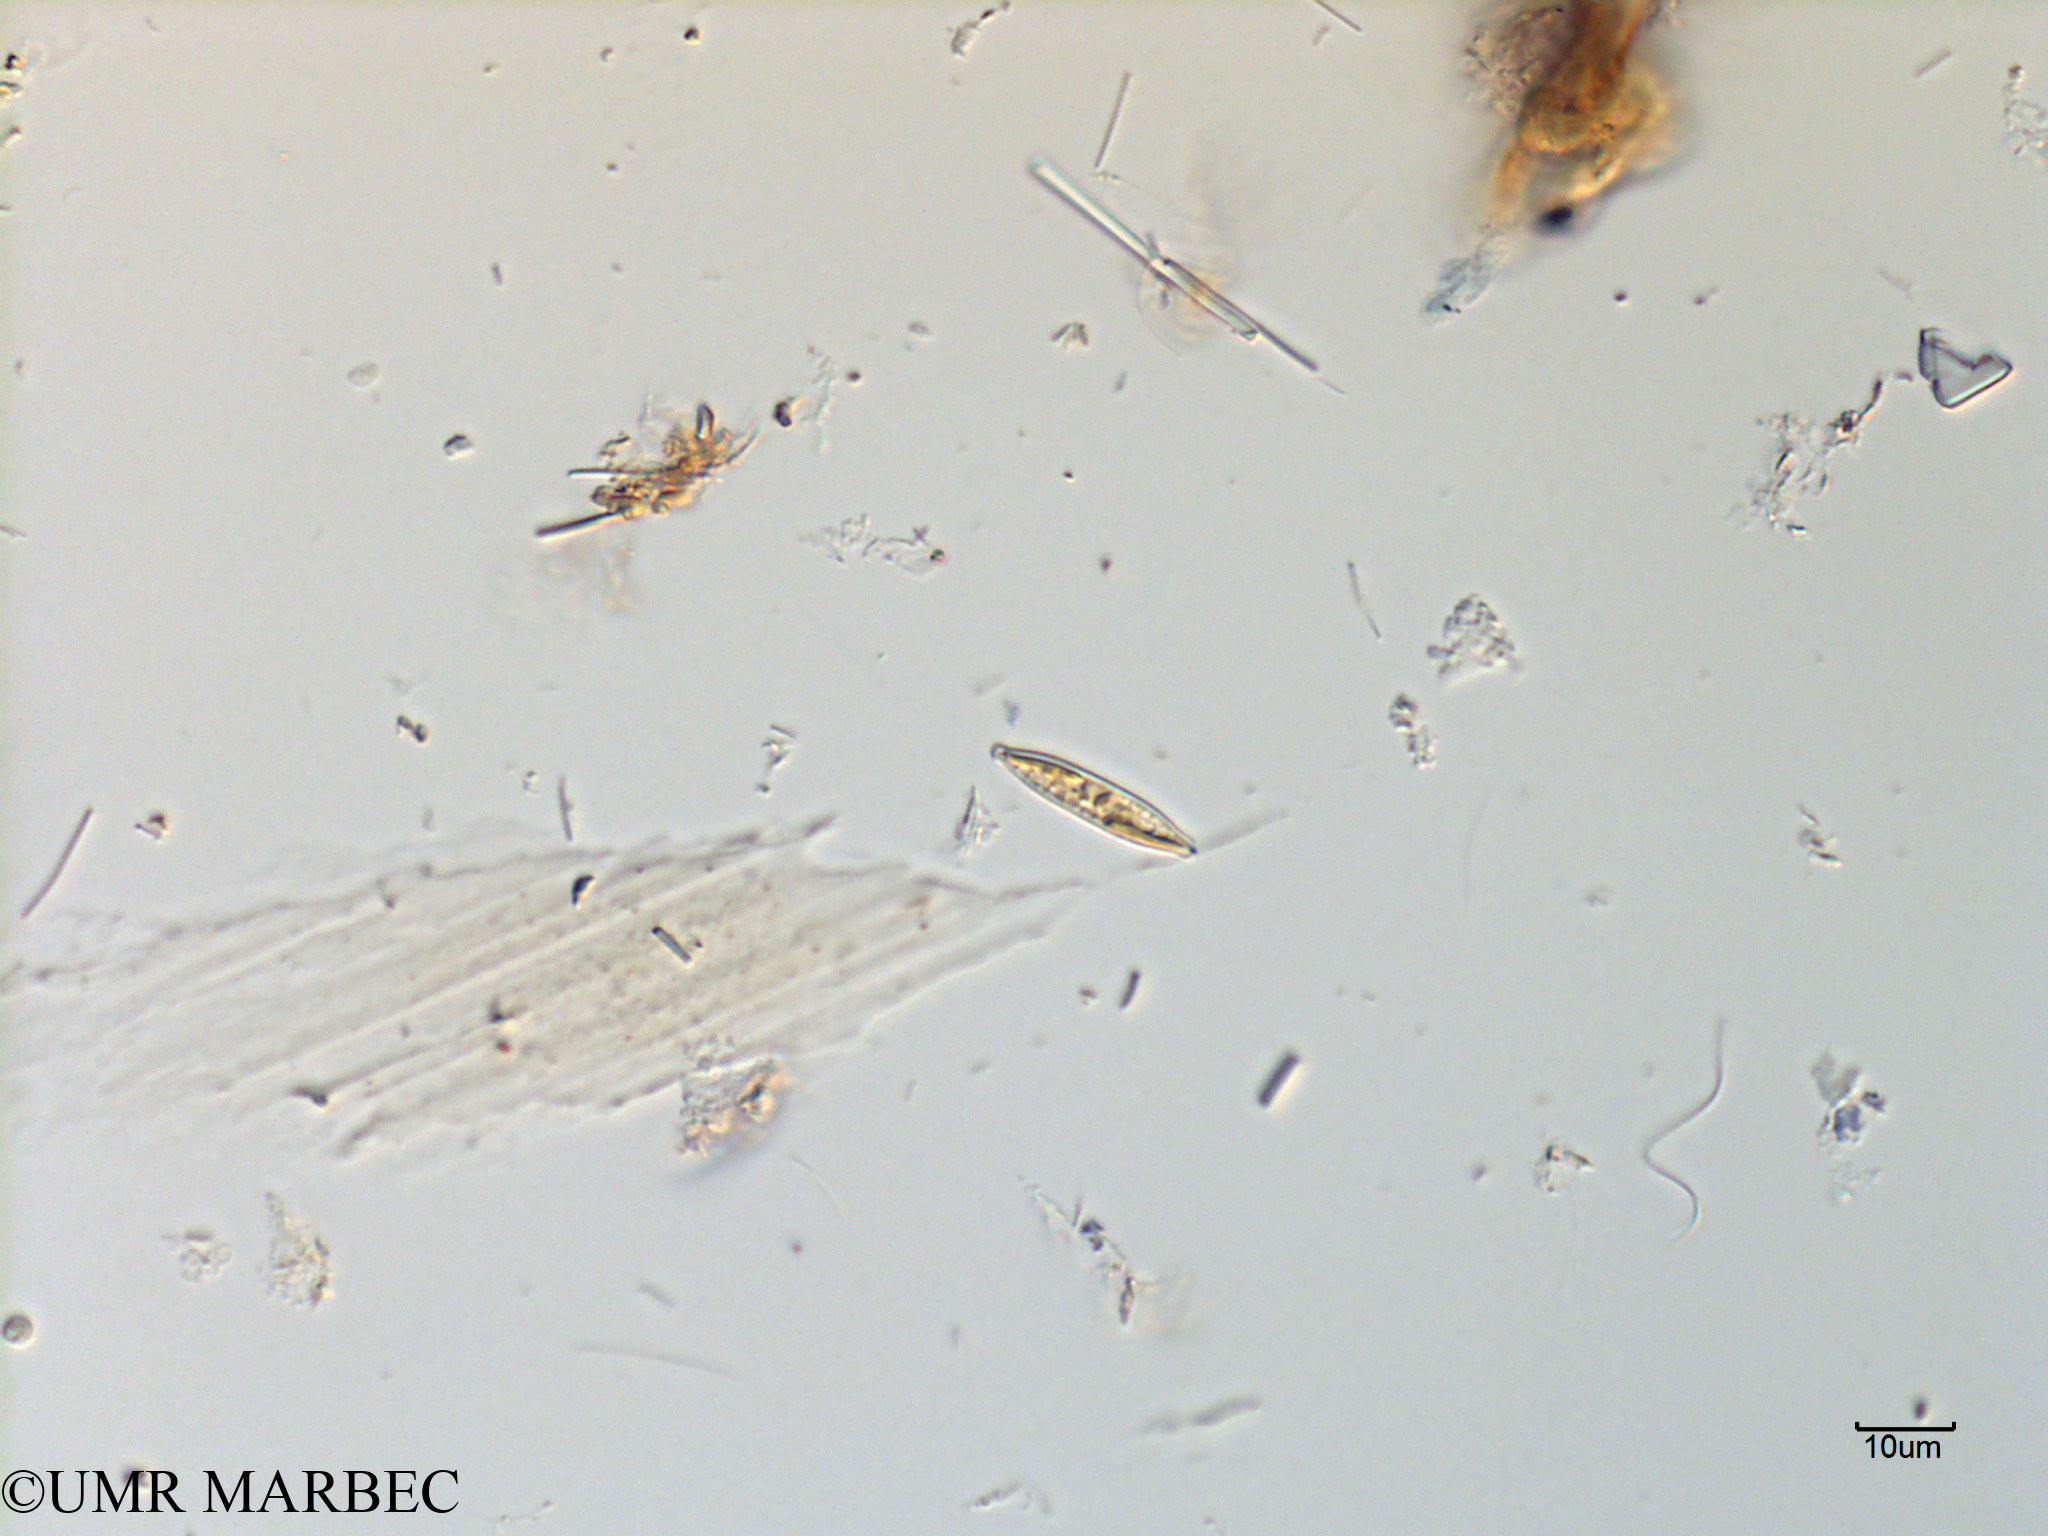 phyto/Scattered_Islands/mayotte_lagoon/SIREME May 2016/Pennée spp 3-5x15-40µm (MAY10_pennee laquelle b-2).tif(copy).jpg